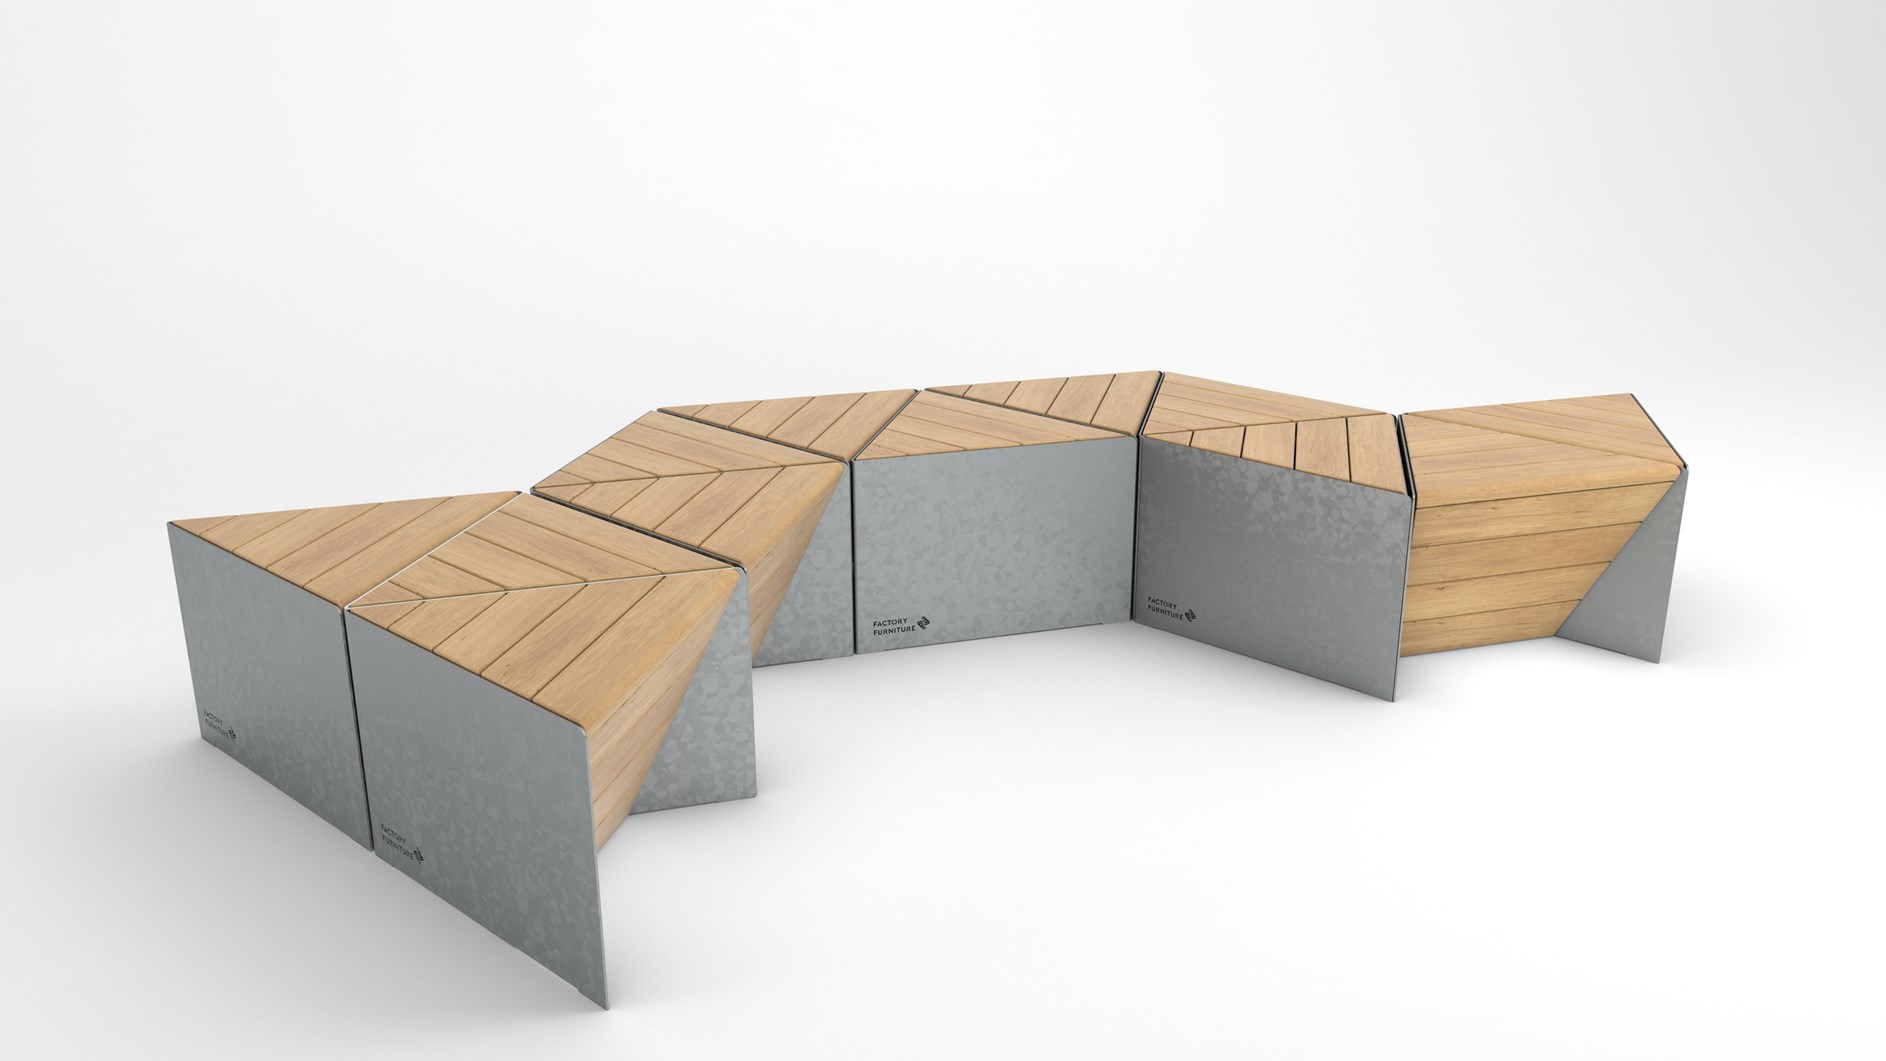 New Modular and Adaptable Public Seating by Factory Furniture